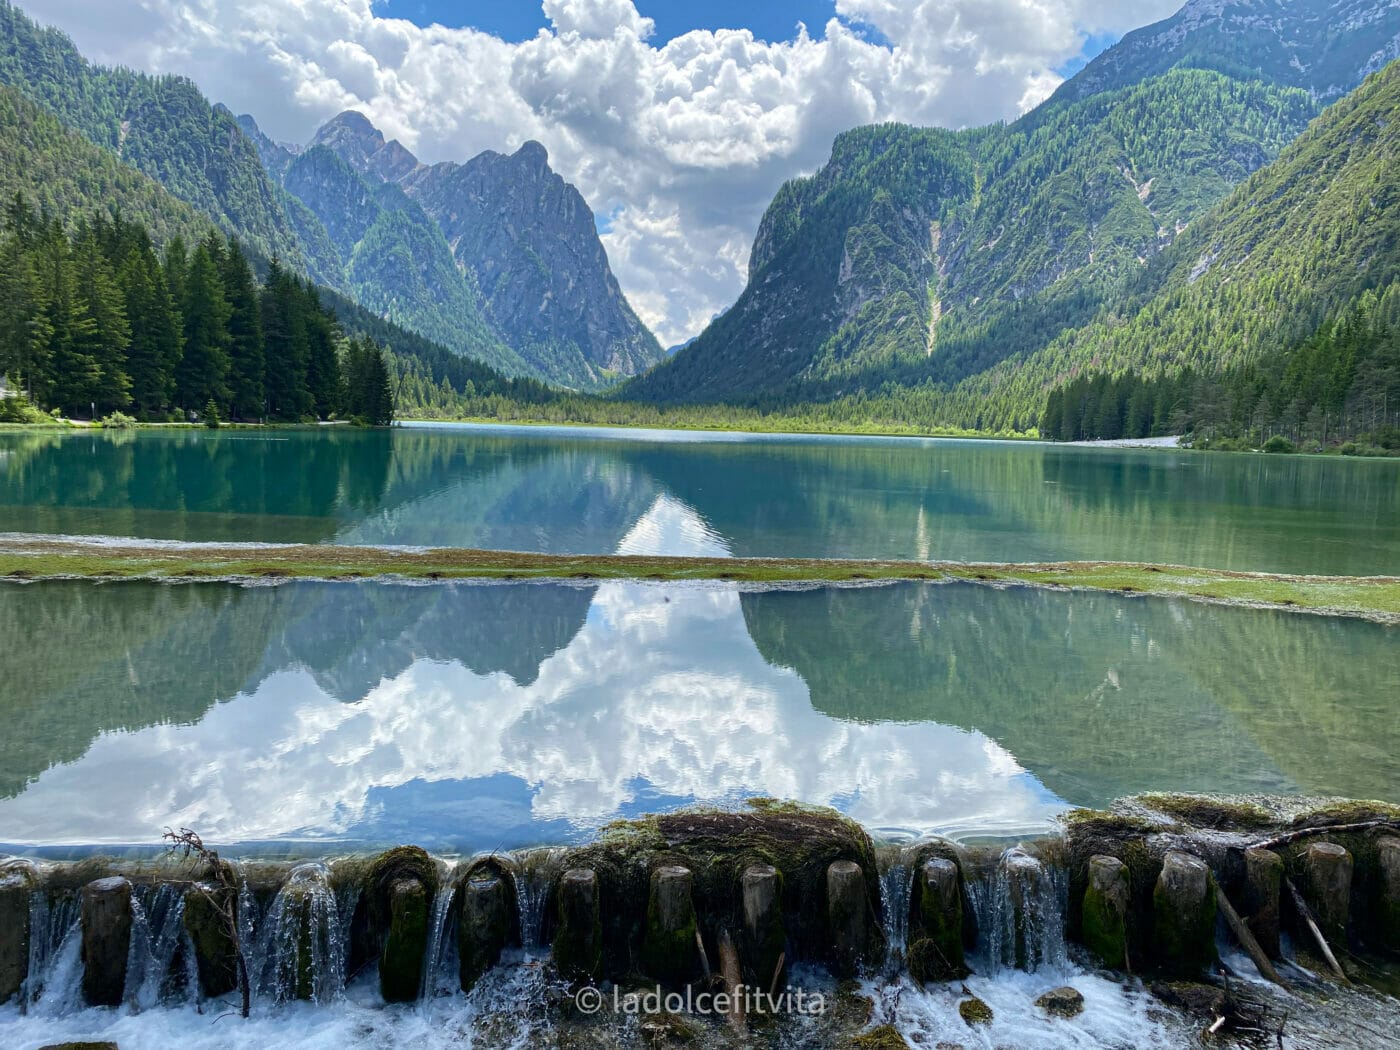 pristine crystalline waters at dobbiaco lake in italy with Dolomites mountains in the background